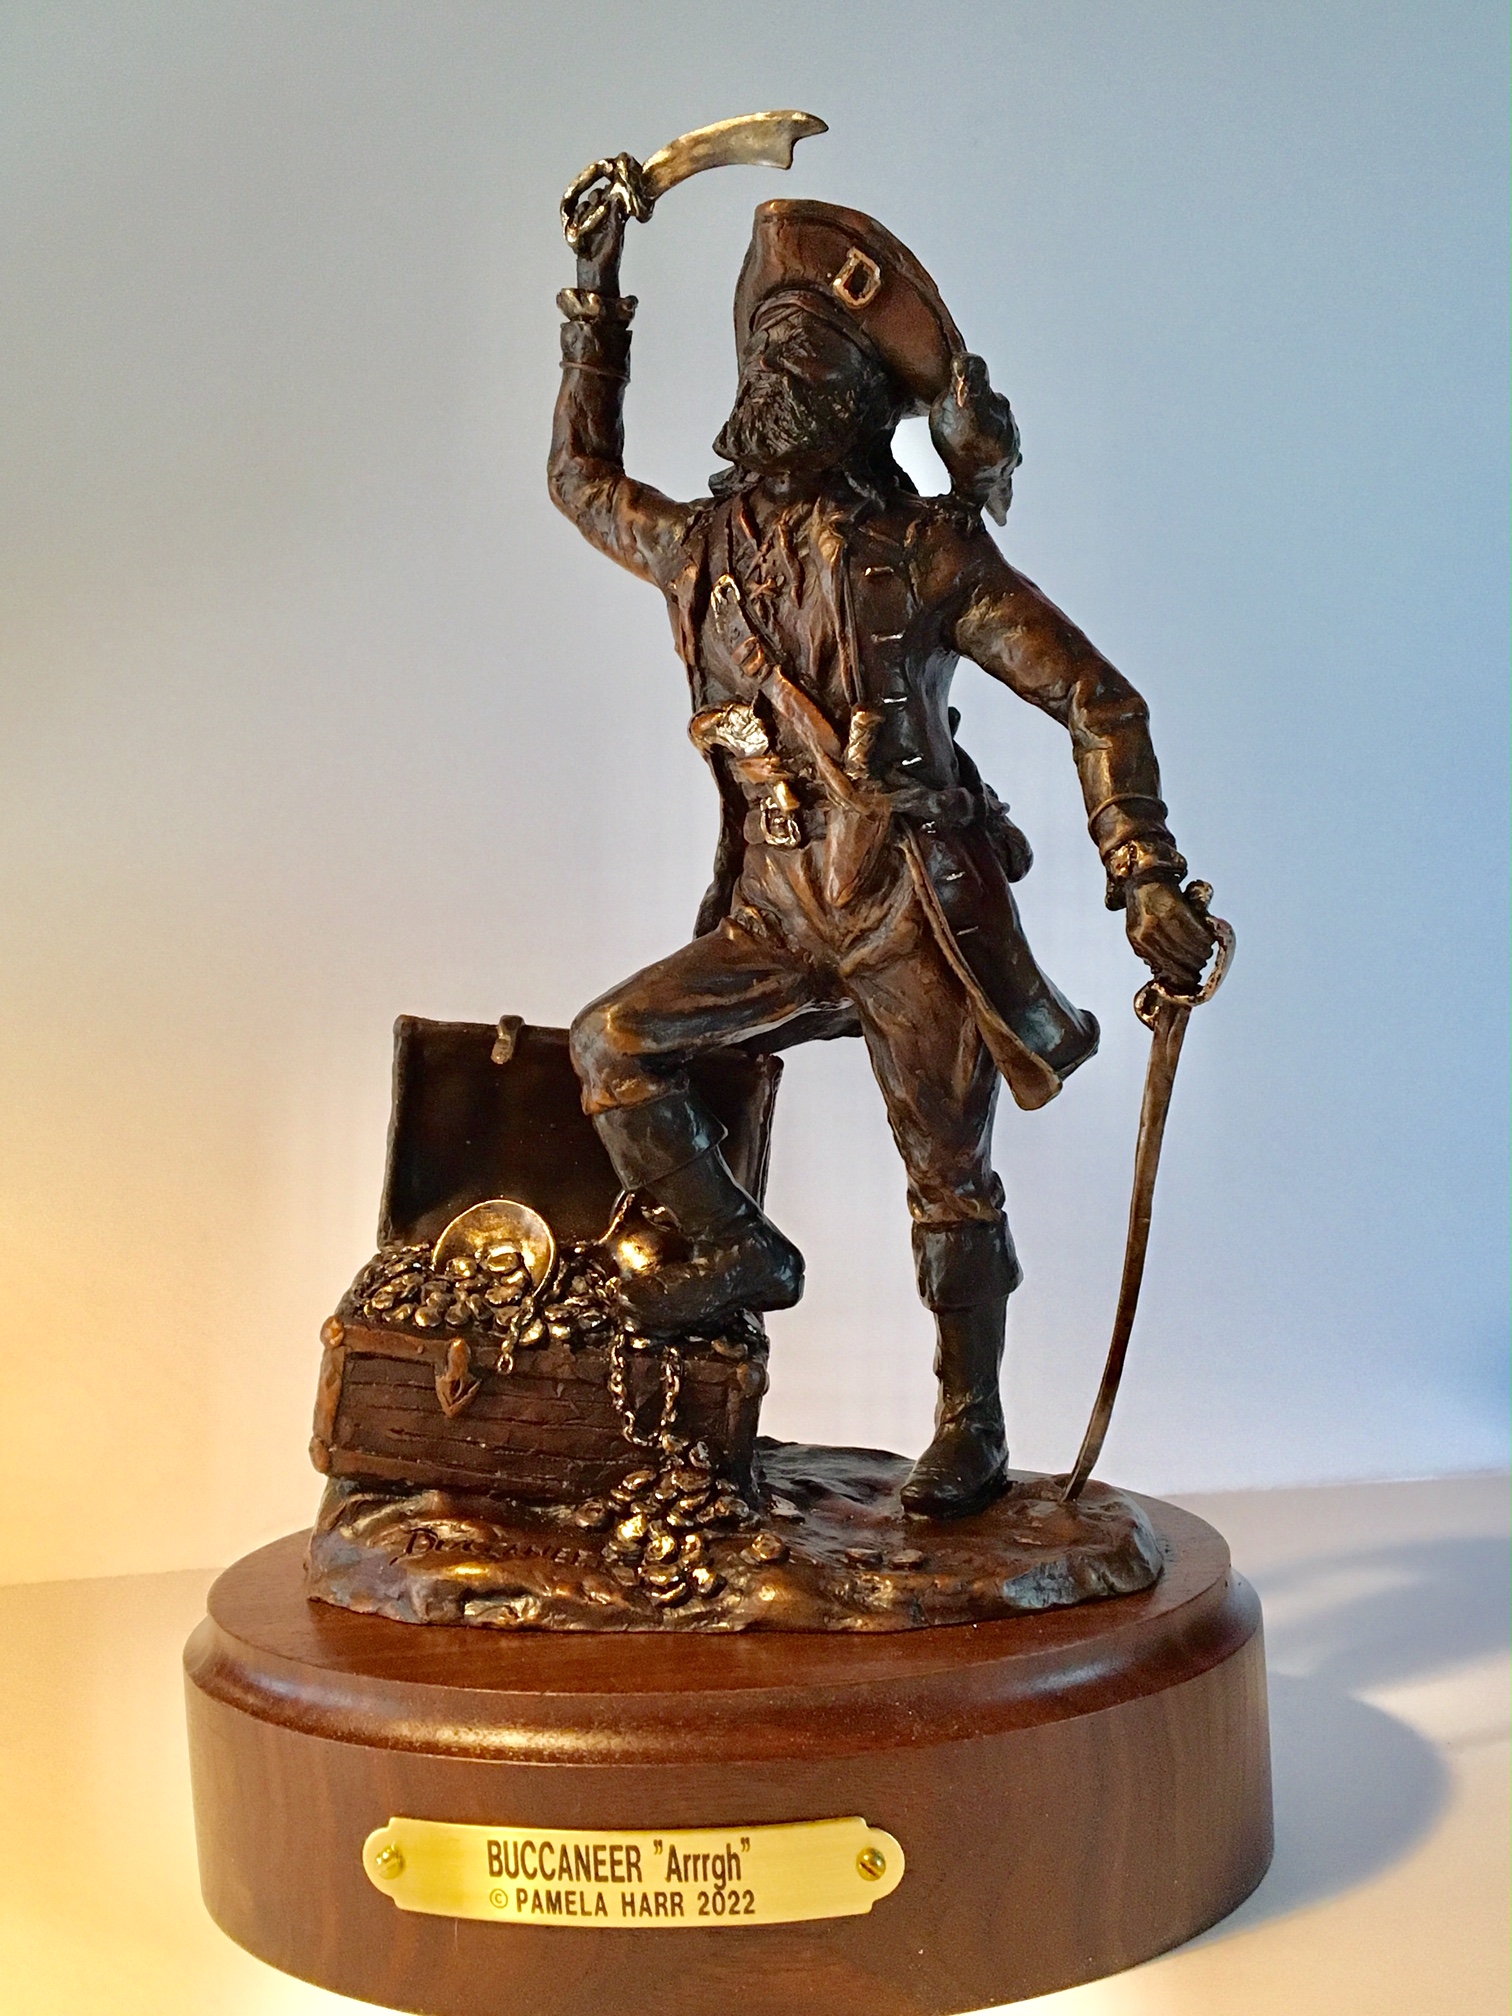 Bronze sculpture of a buccaneer with his foot on a treasure chest and a sword in his raised right hand.